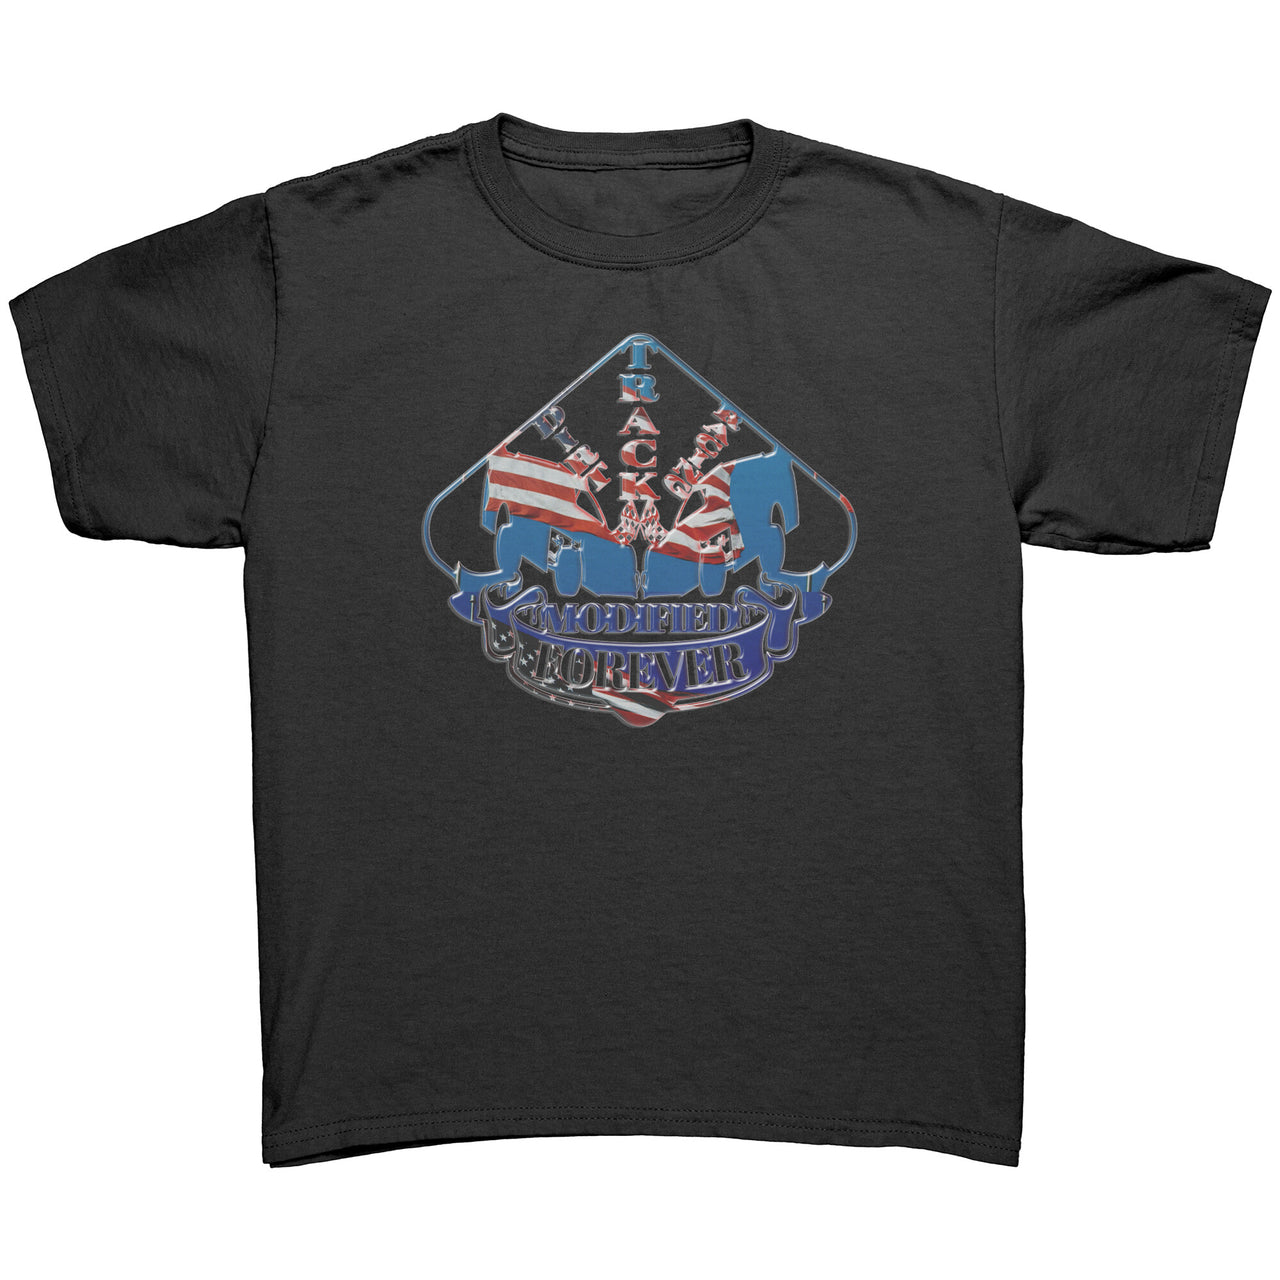 USA Dirt Modified Forever Youth T-shirts/Hoodies